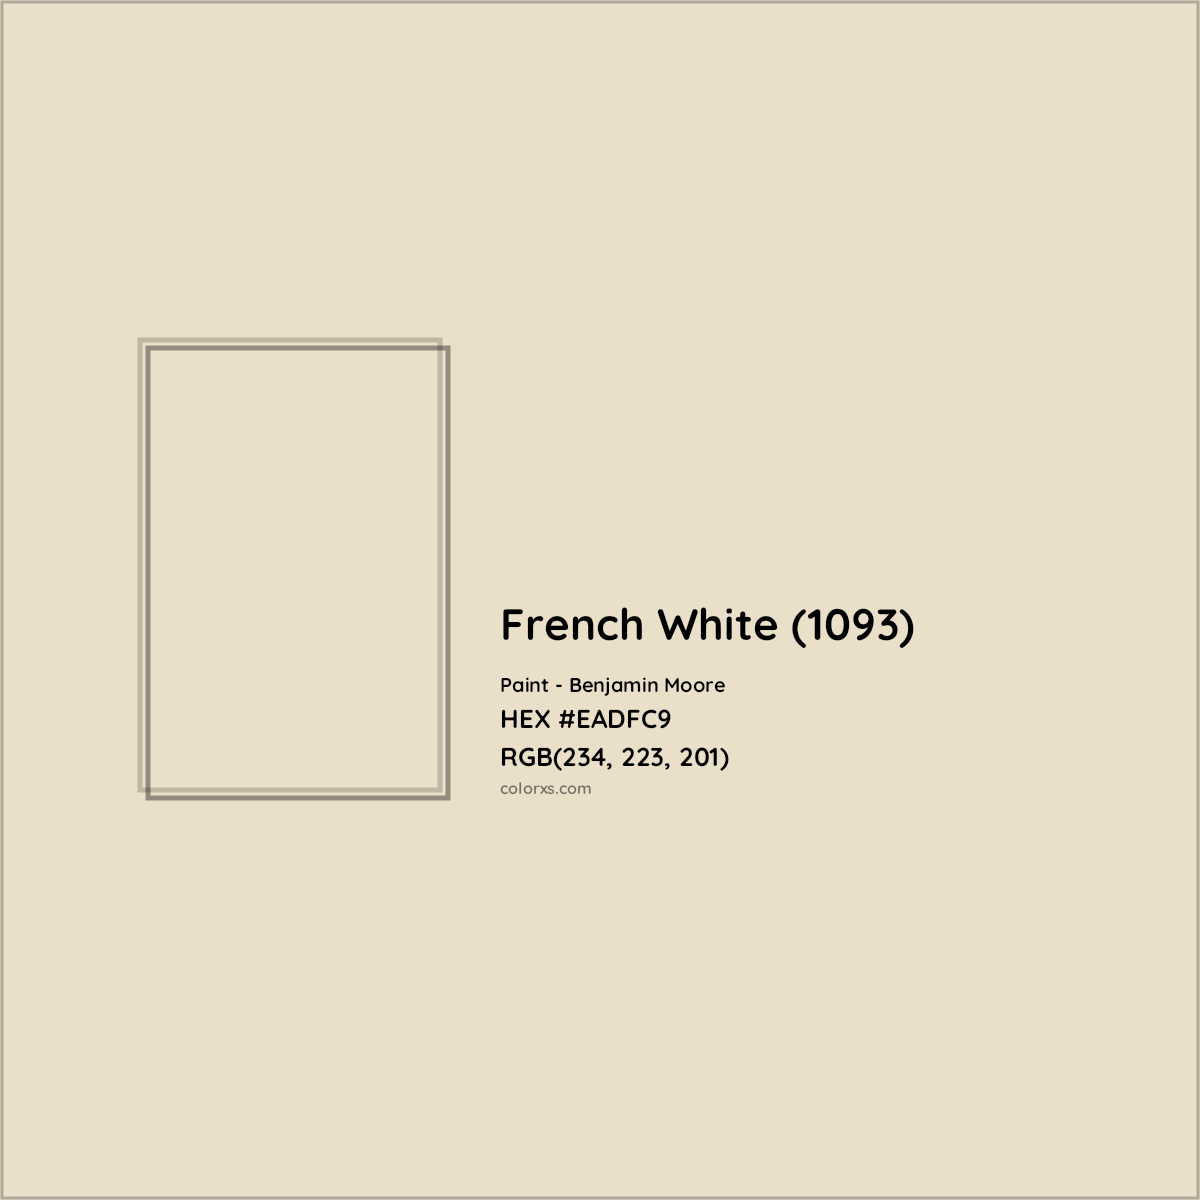 HEX #EADFC9 French White (1093) Paint Benjamin Moore - Color Code